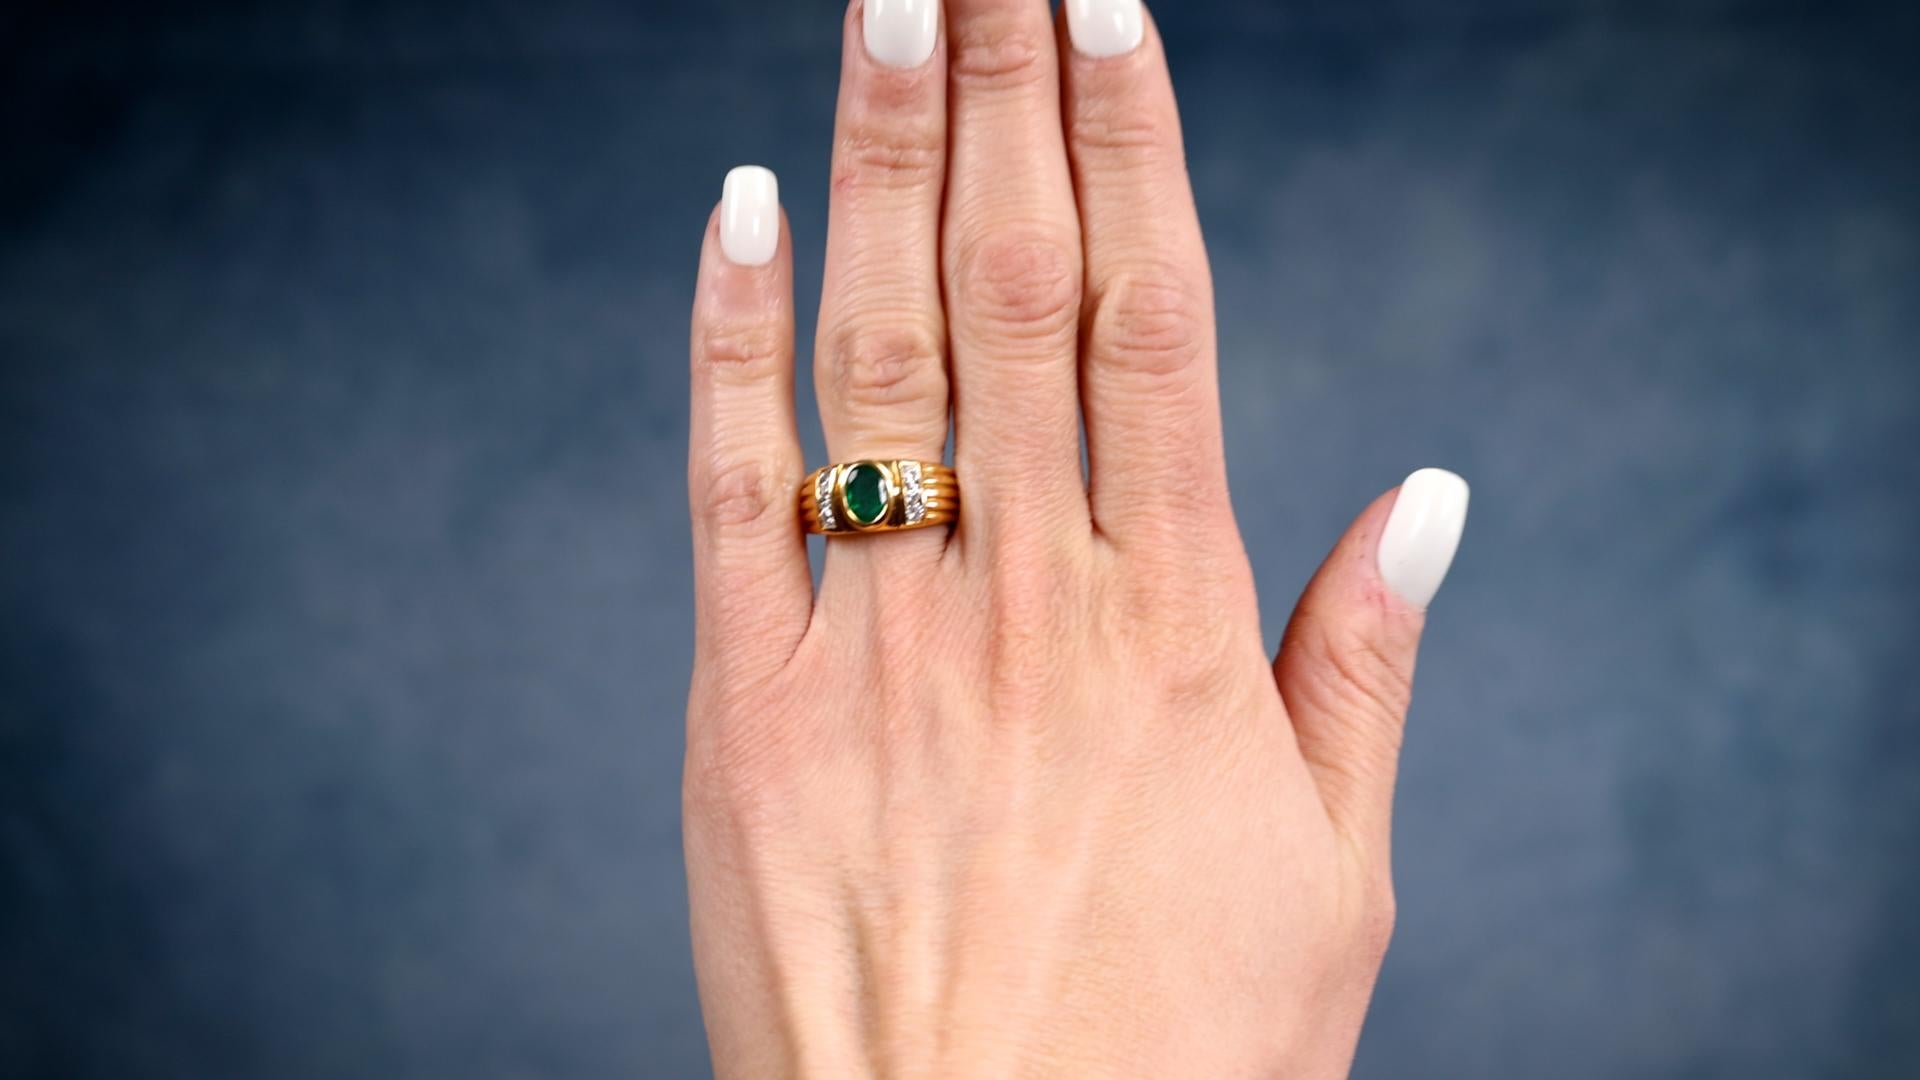 One Vintage French Emerald and Diamond 18k Yellow Gold Ring. Featuring one oval mixed cut emerald weighing approximately 0.65 carat. Accented by six round brilliant cut diamonds with a total weight of approximately 0.30 carat, graded G-H color, SI